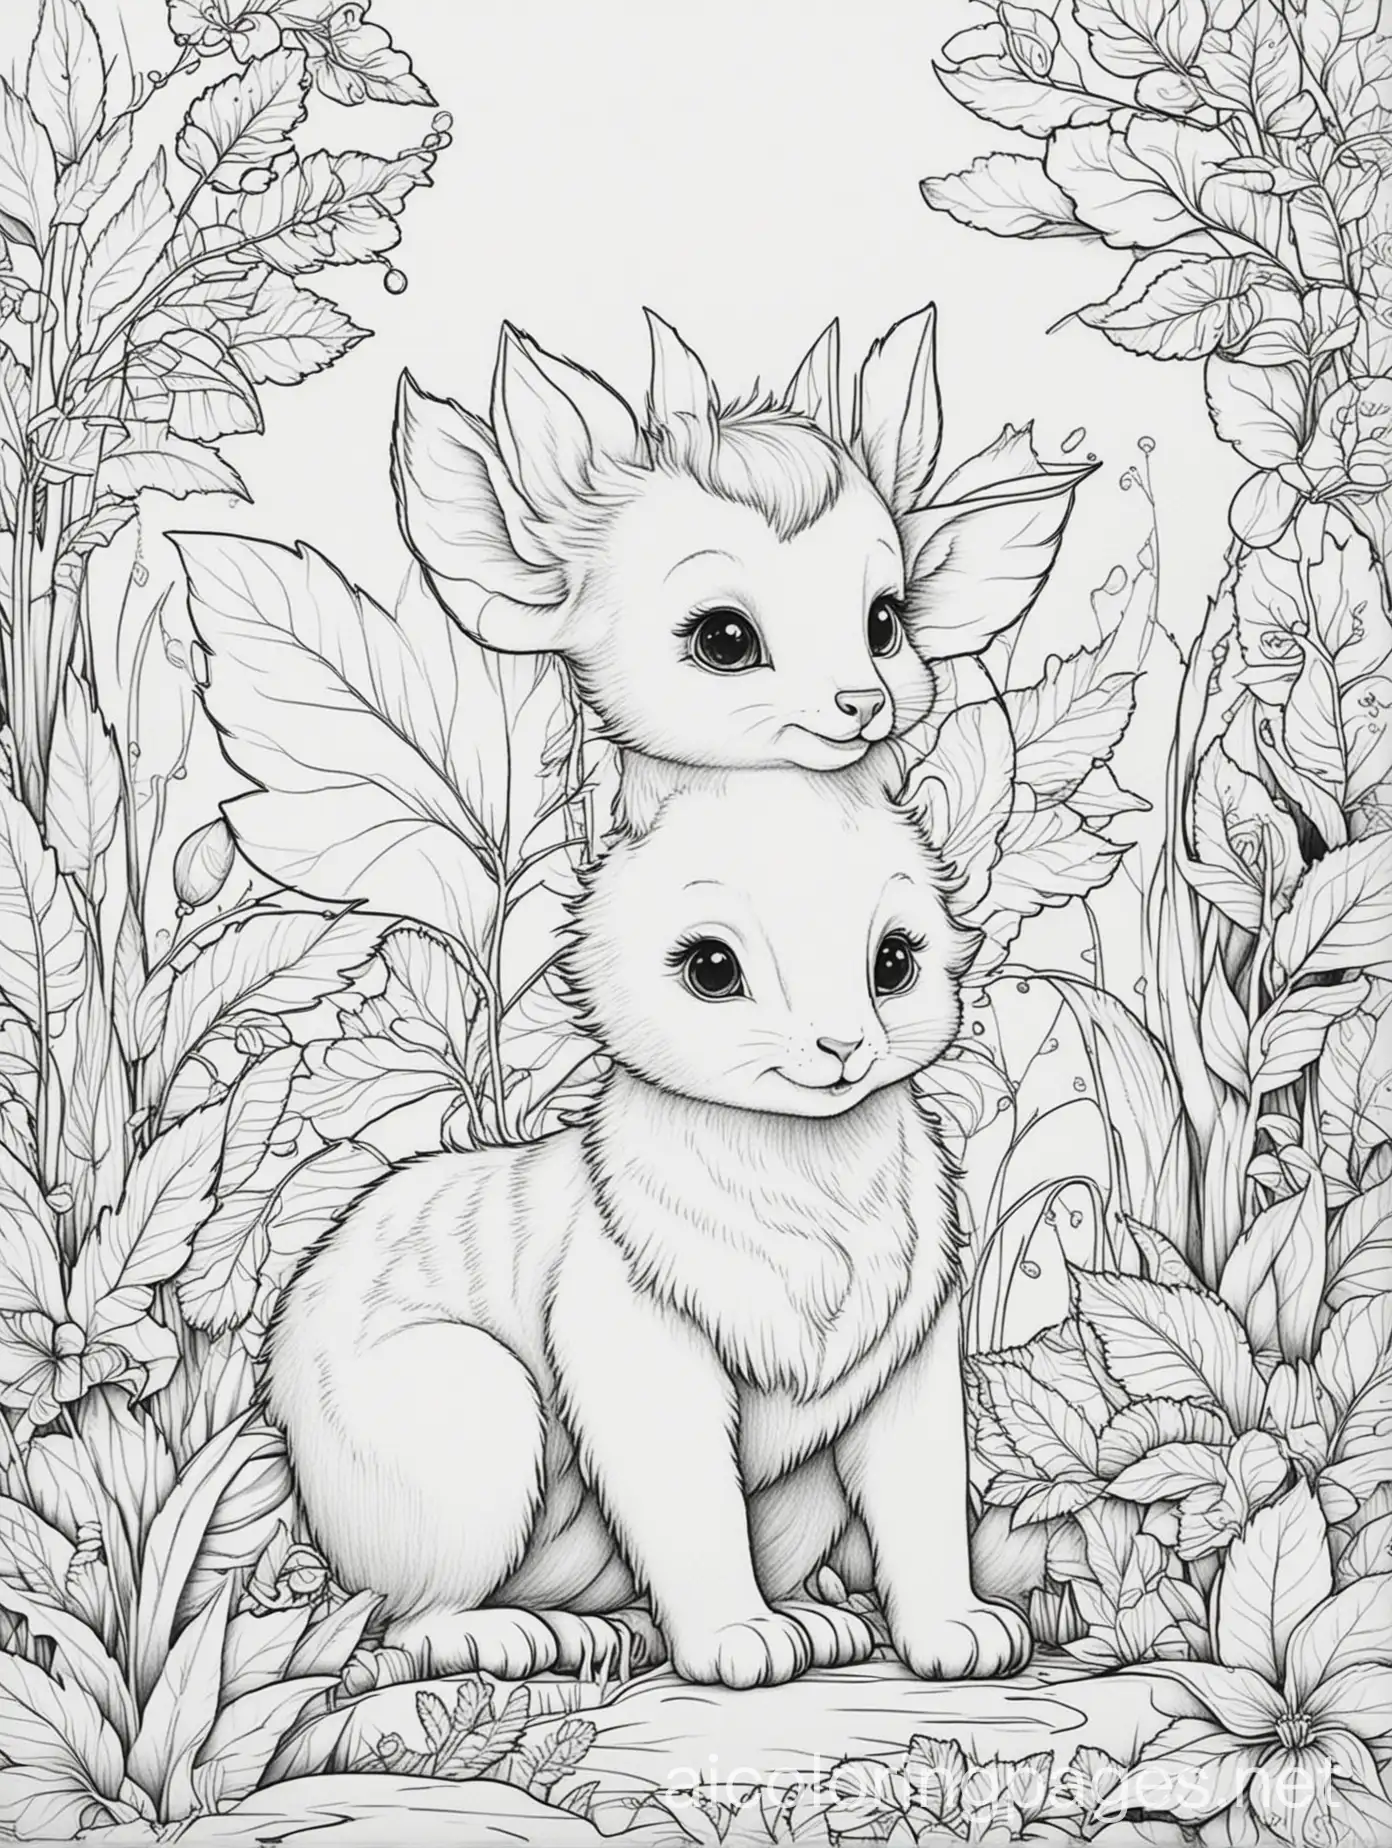 fairytale baby
 animals
, Coloring Page, black and white, line art, white background, Simplicity, Ample White Space. The background of the coloring page is plain white to make it easy for young children to color within the lines. The outlines of all the subjects are easy to distinguish, making it simple for kids to color without too much difficulty